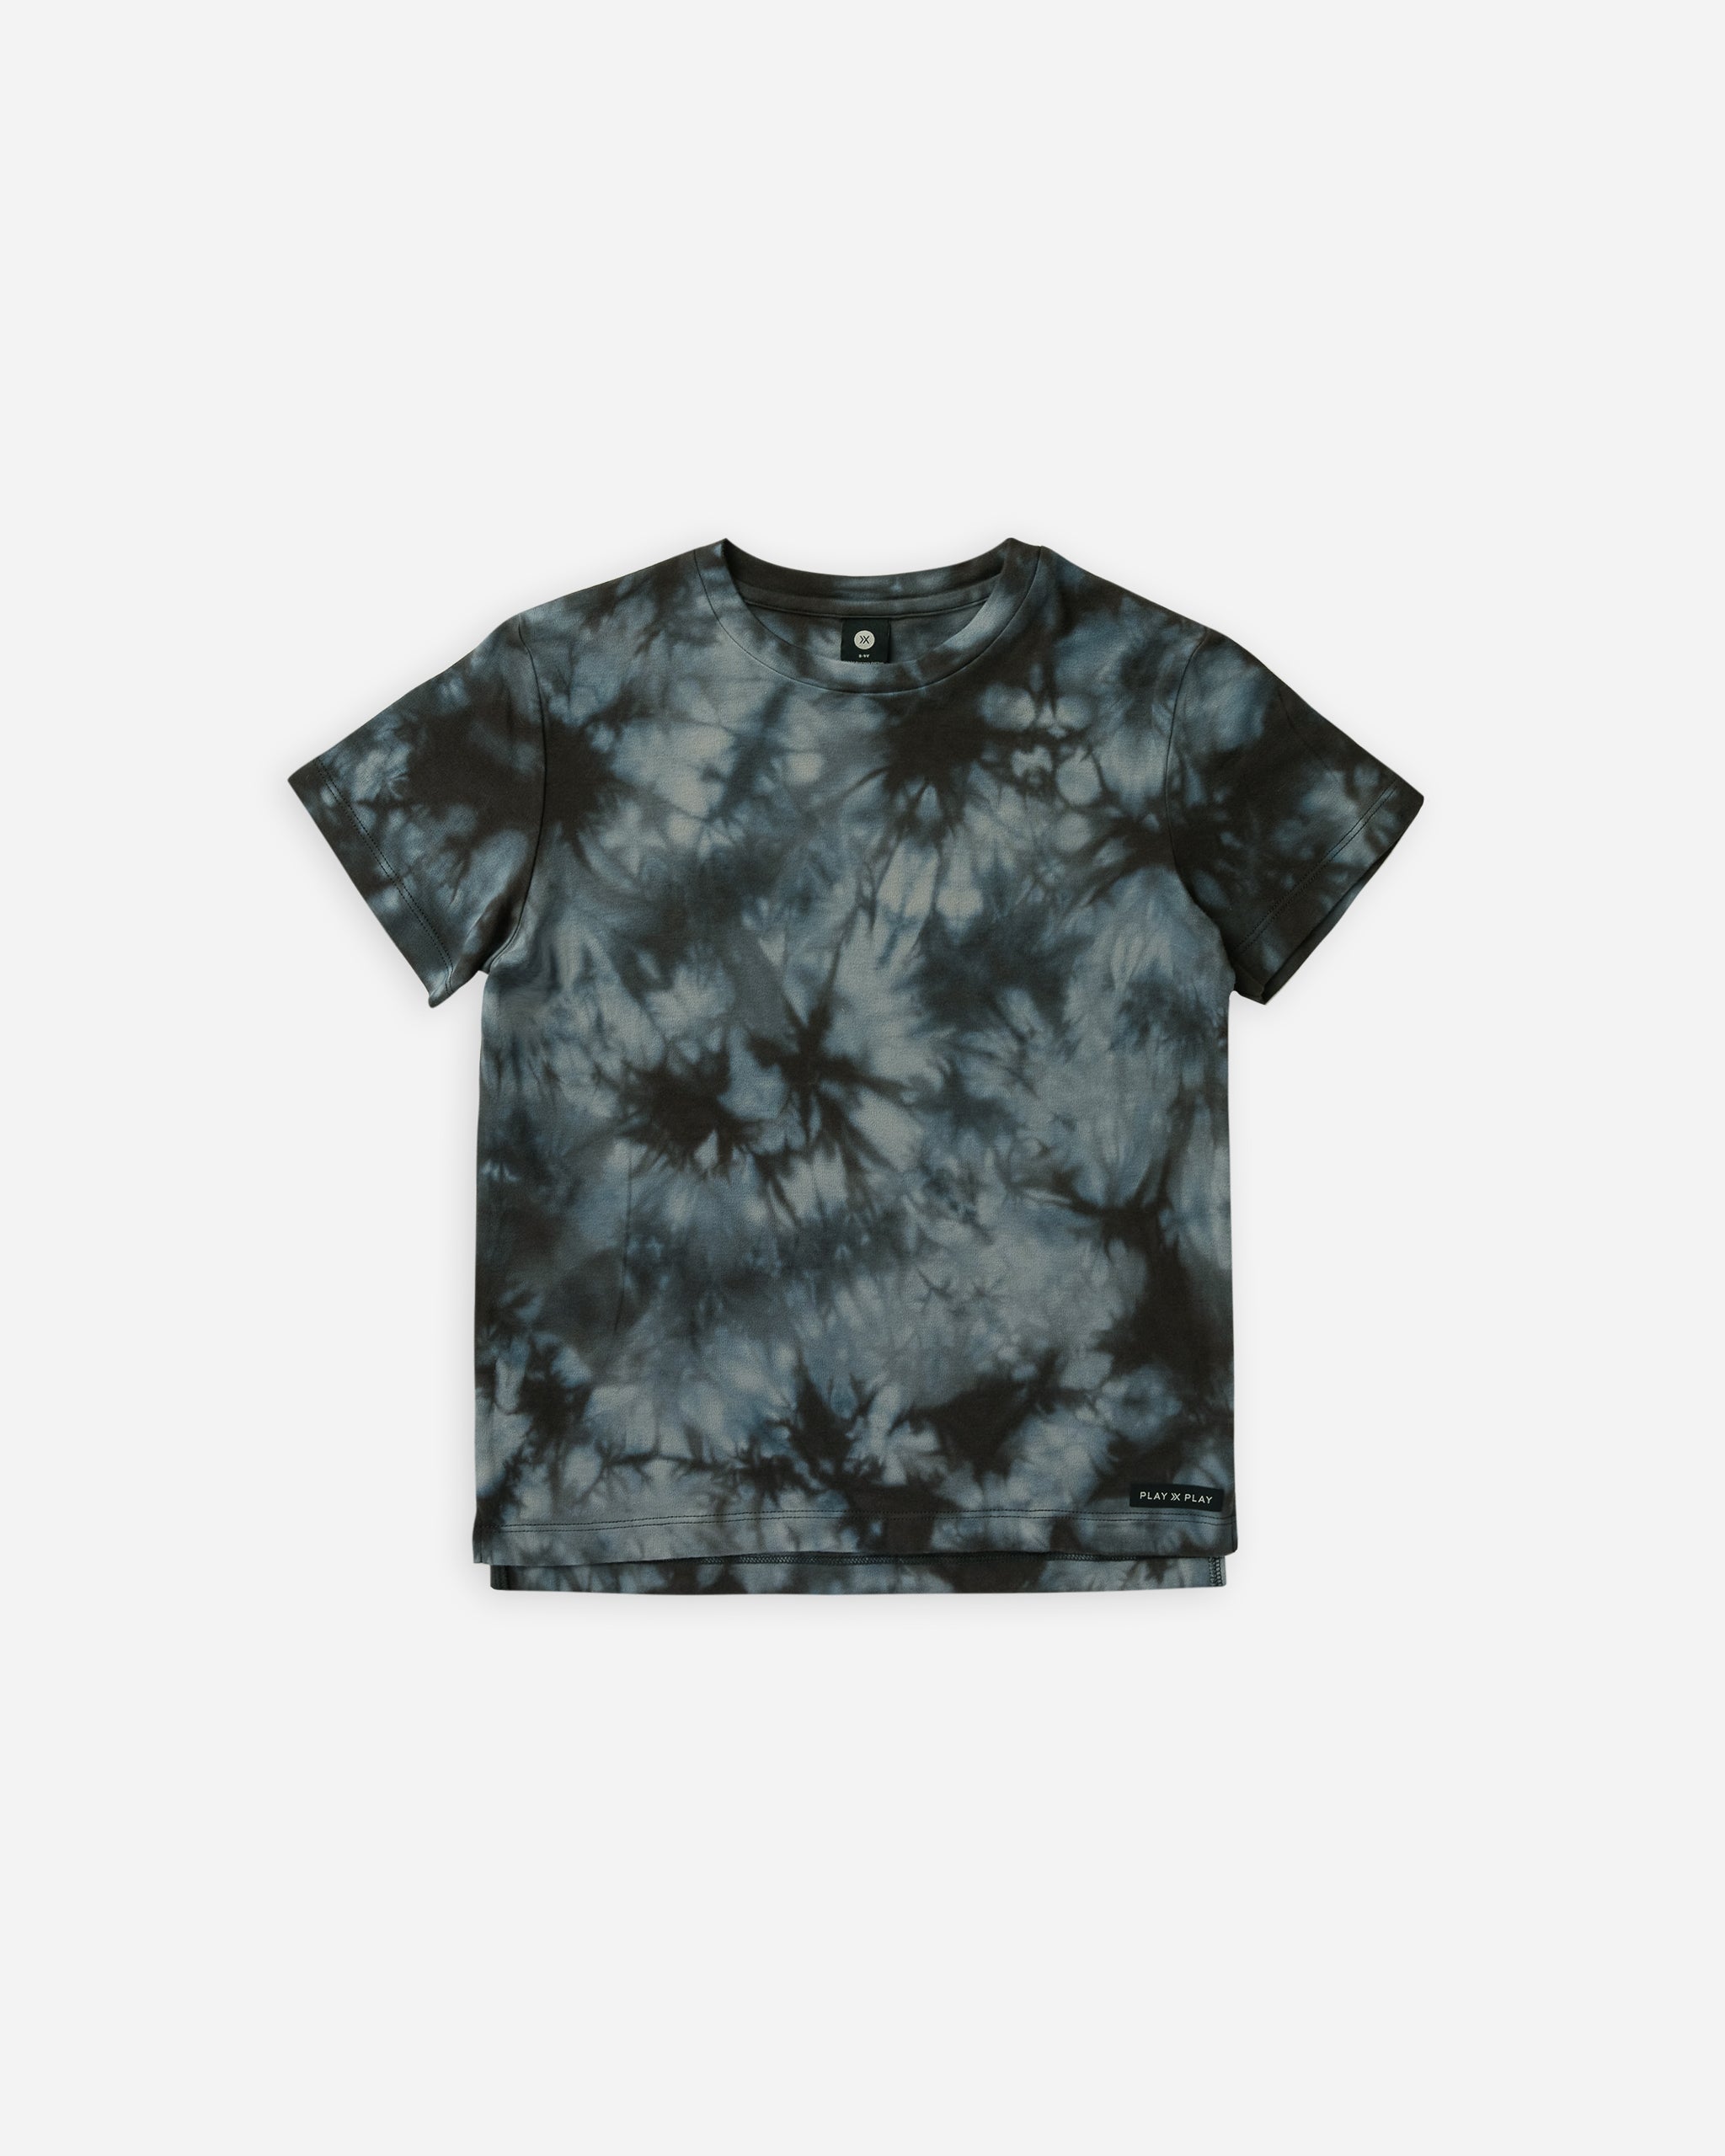 Cove Essential Tee | indigo tie-dye - Rylee + Cru | Kids Clothes | Trendy Baby Clothes | Modern Infant Outfits |